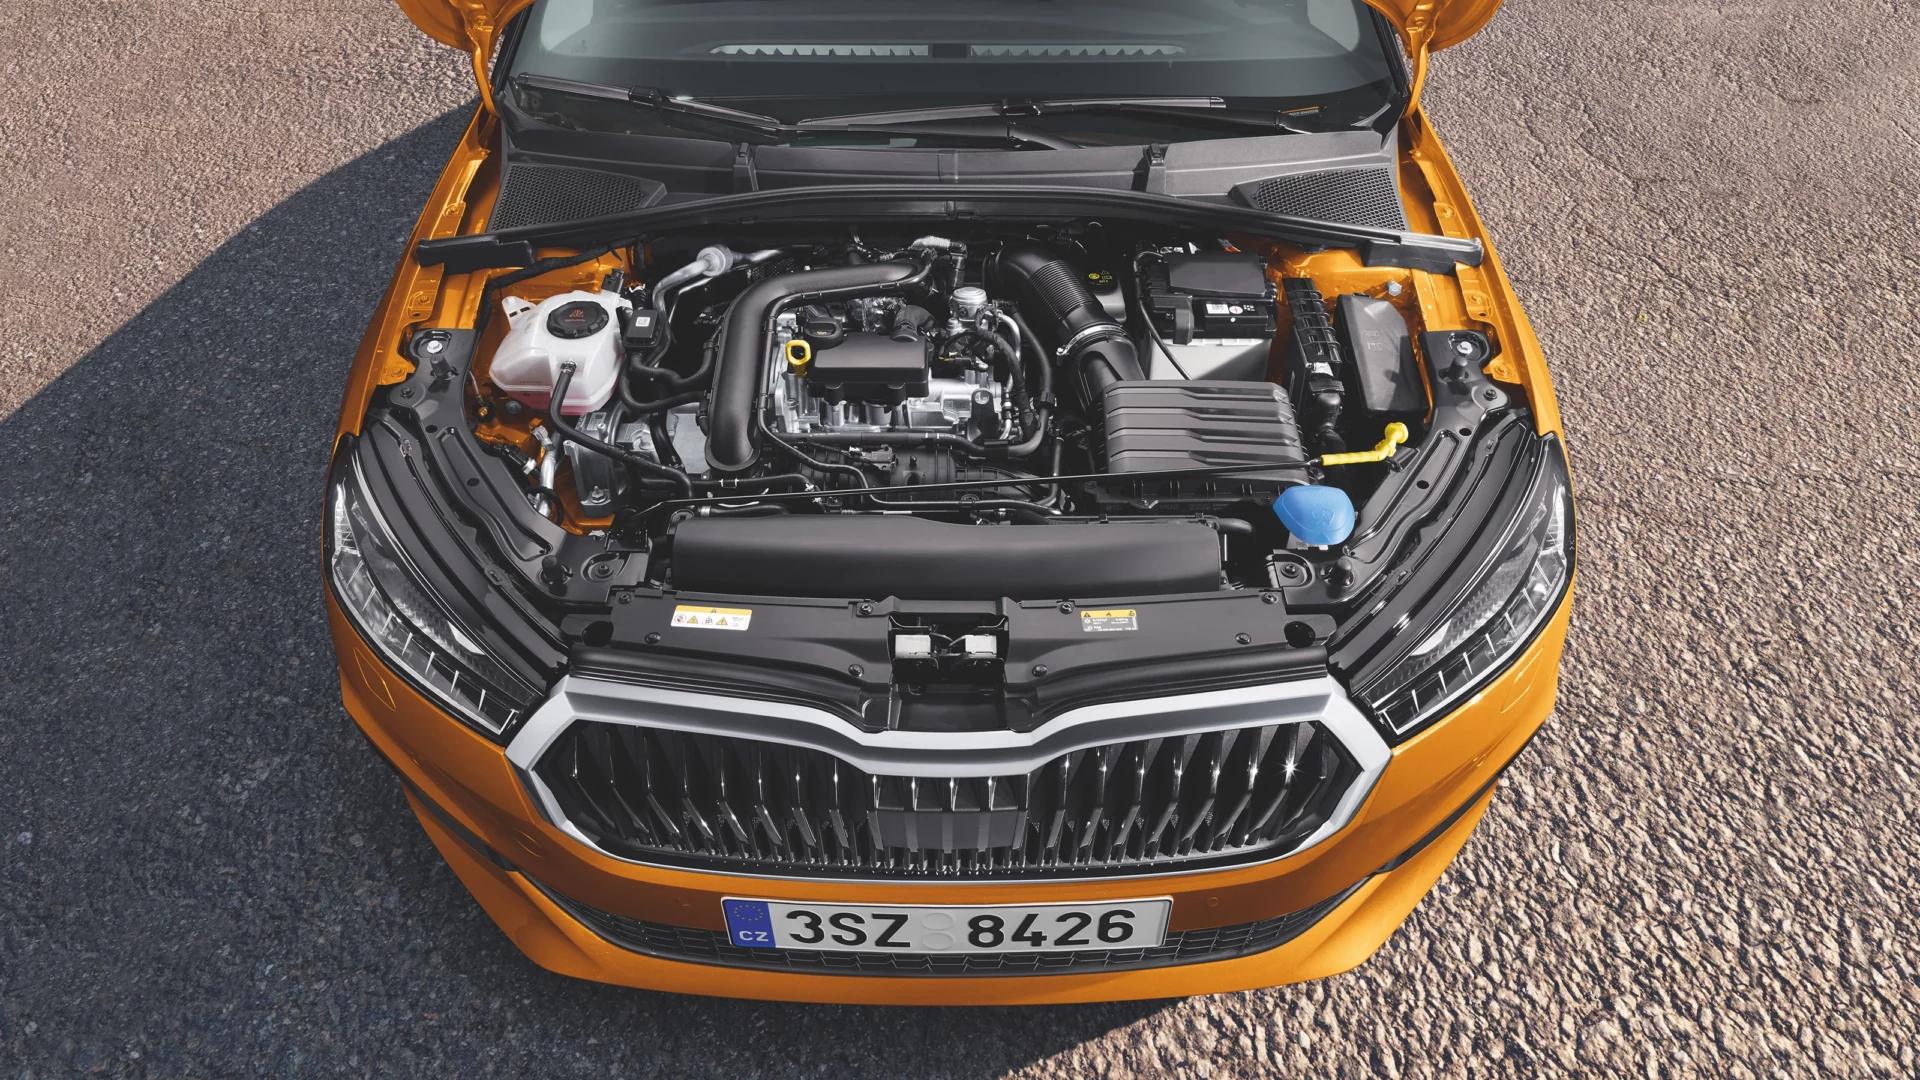 MPI & TSI. Škoda in charge of combustion engines for 7 brands